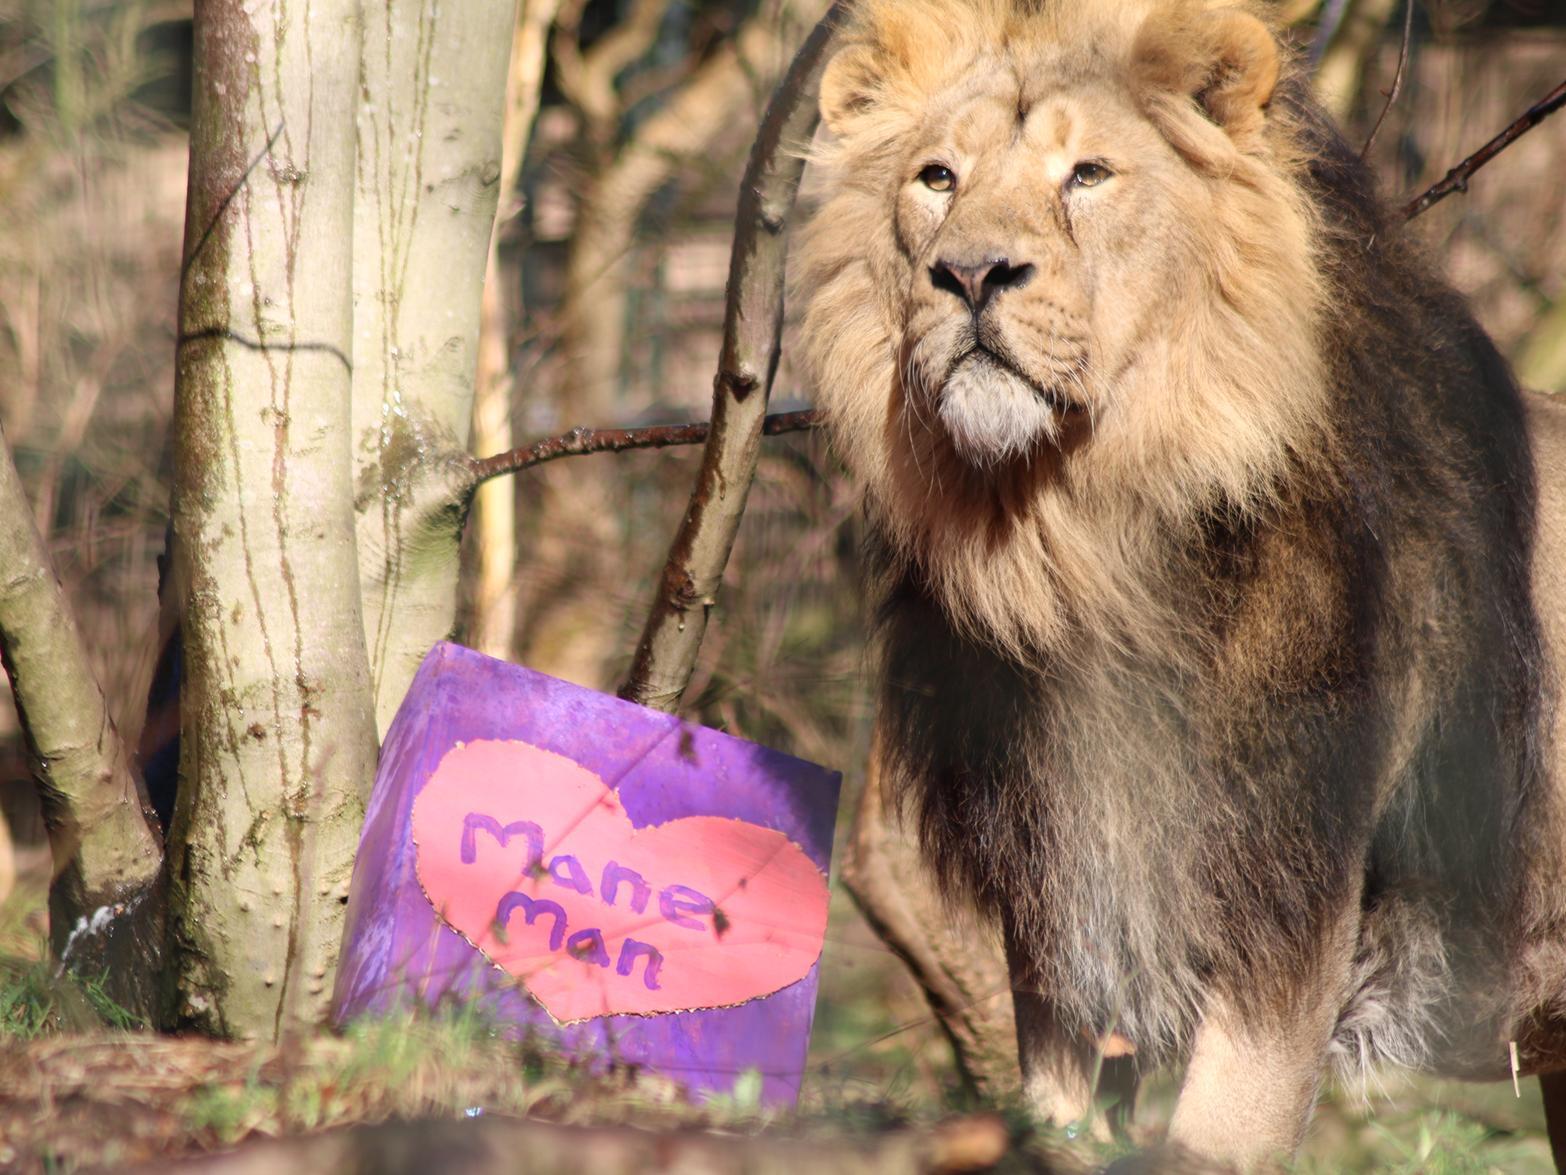 The keepers spared no effort treating their pride this week, decorating the treat boxes with amusing slogans. Picture: RZSS/Sian Addison